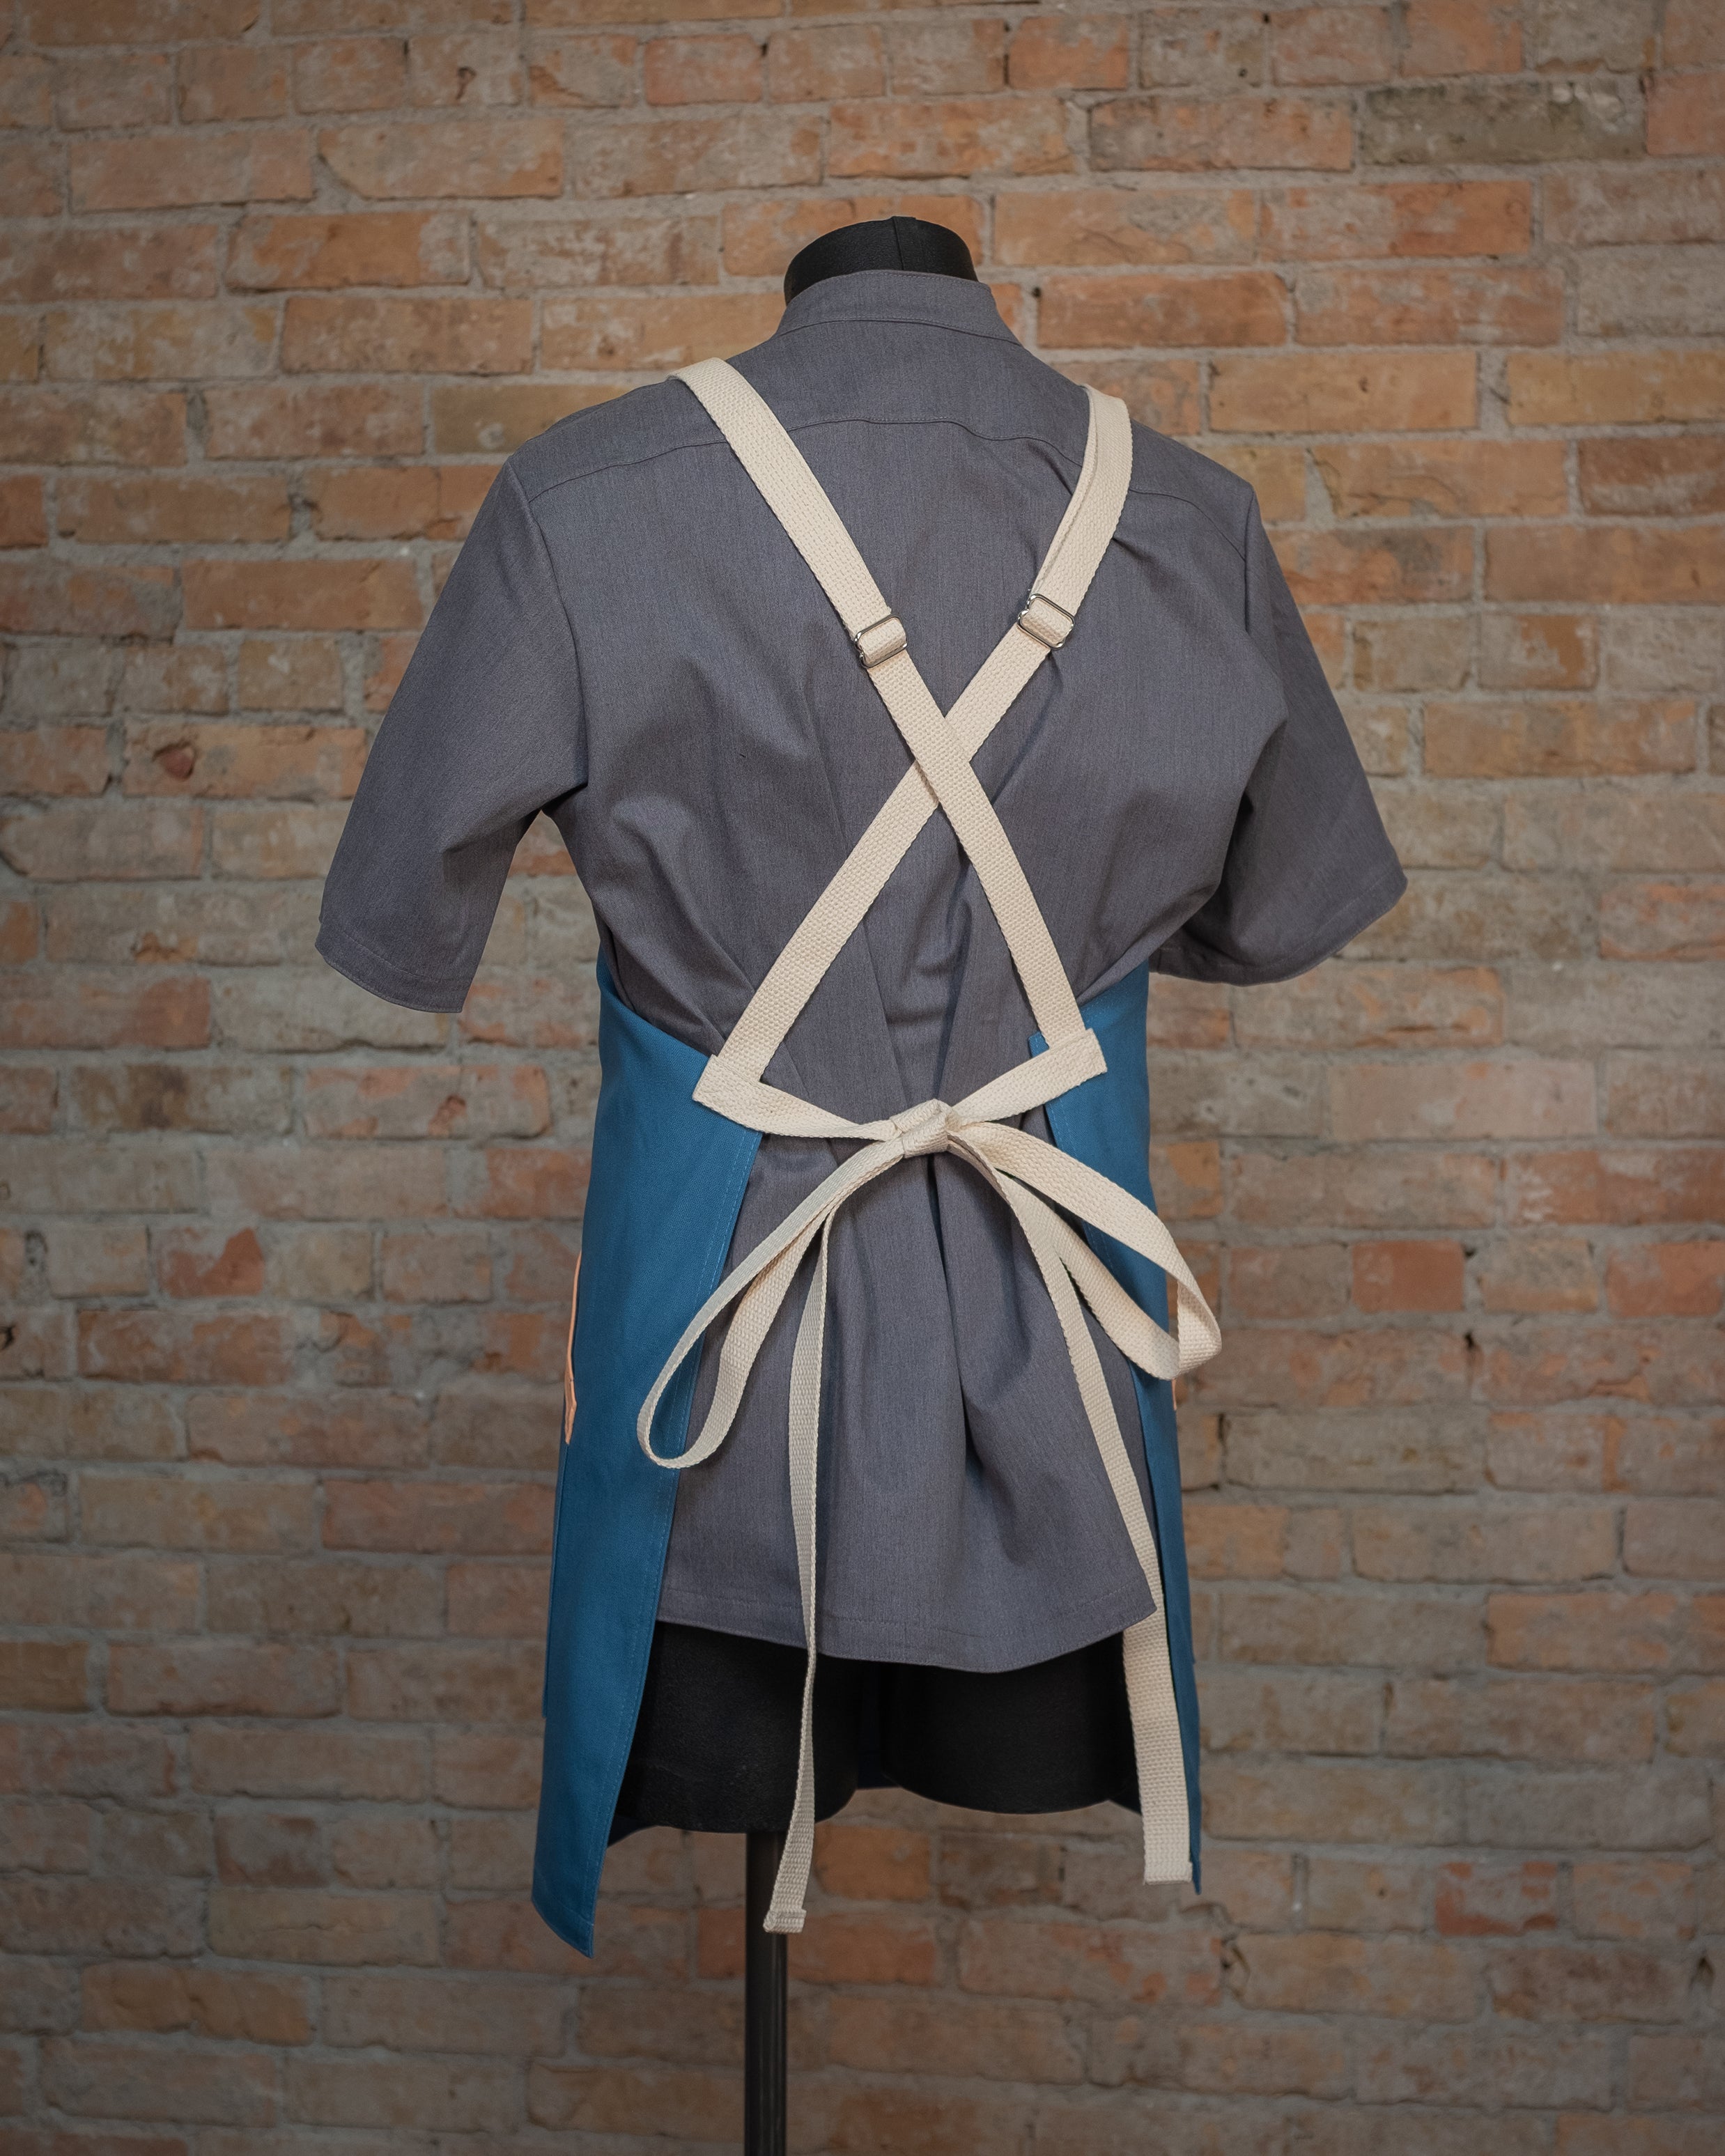 Cotton duck cloth apron from Craftmade Aprons, Minnesota displayed on a mannequin over a gray chef coat. The apron Miami Nice is shown from the back, displaying the tan crossback strapping.